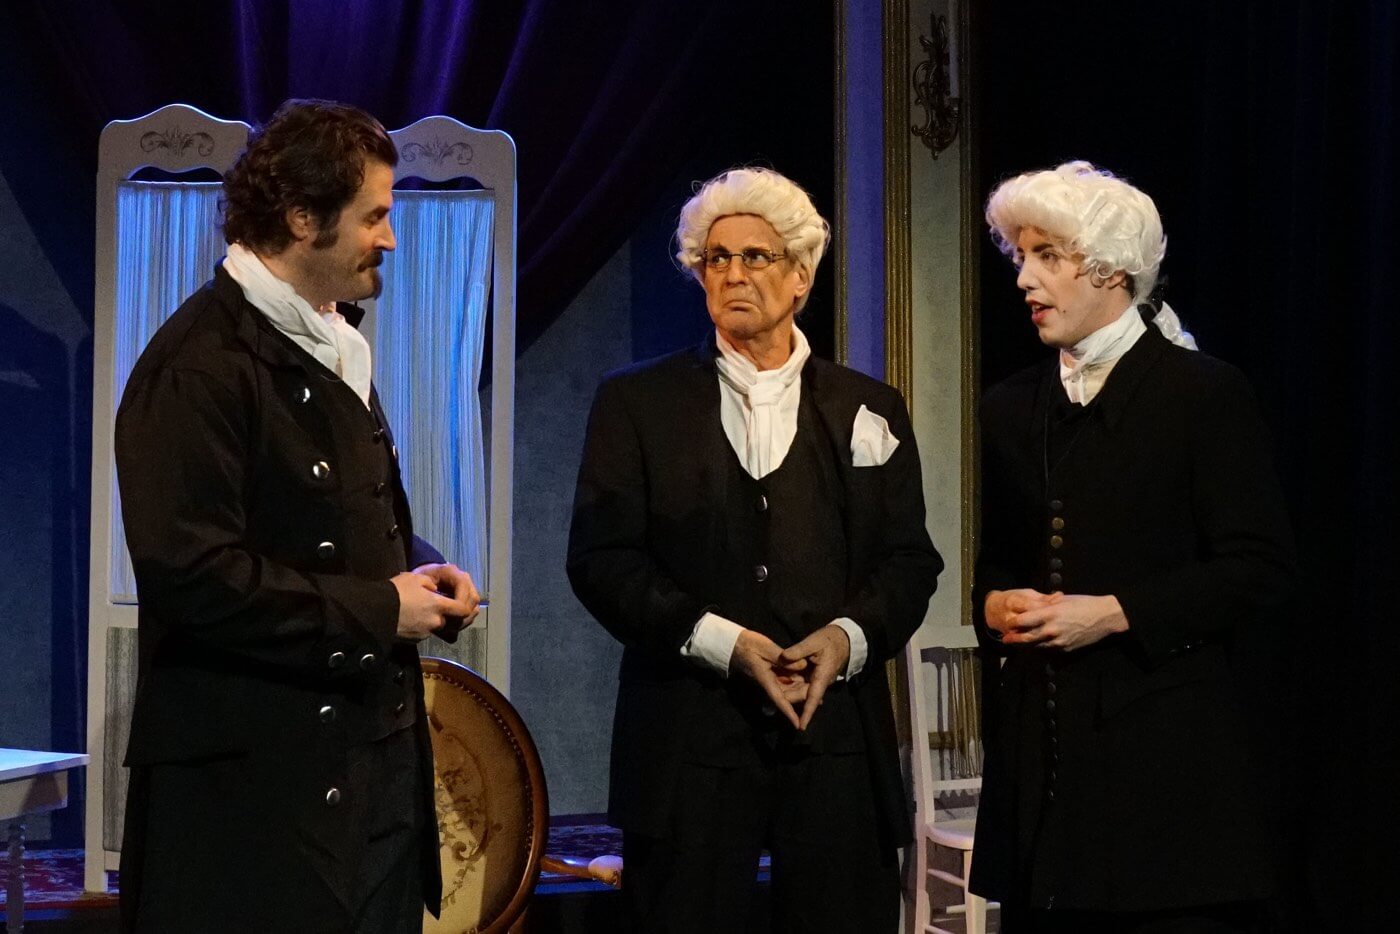 Mesmerized – as Stoerck, with Ingenhousz (Jesse Reich) and Barth (Caleb Streadwick), photo by Craig Robinson, produced by Snowlion Repertory